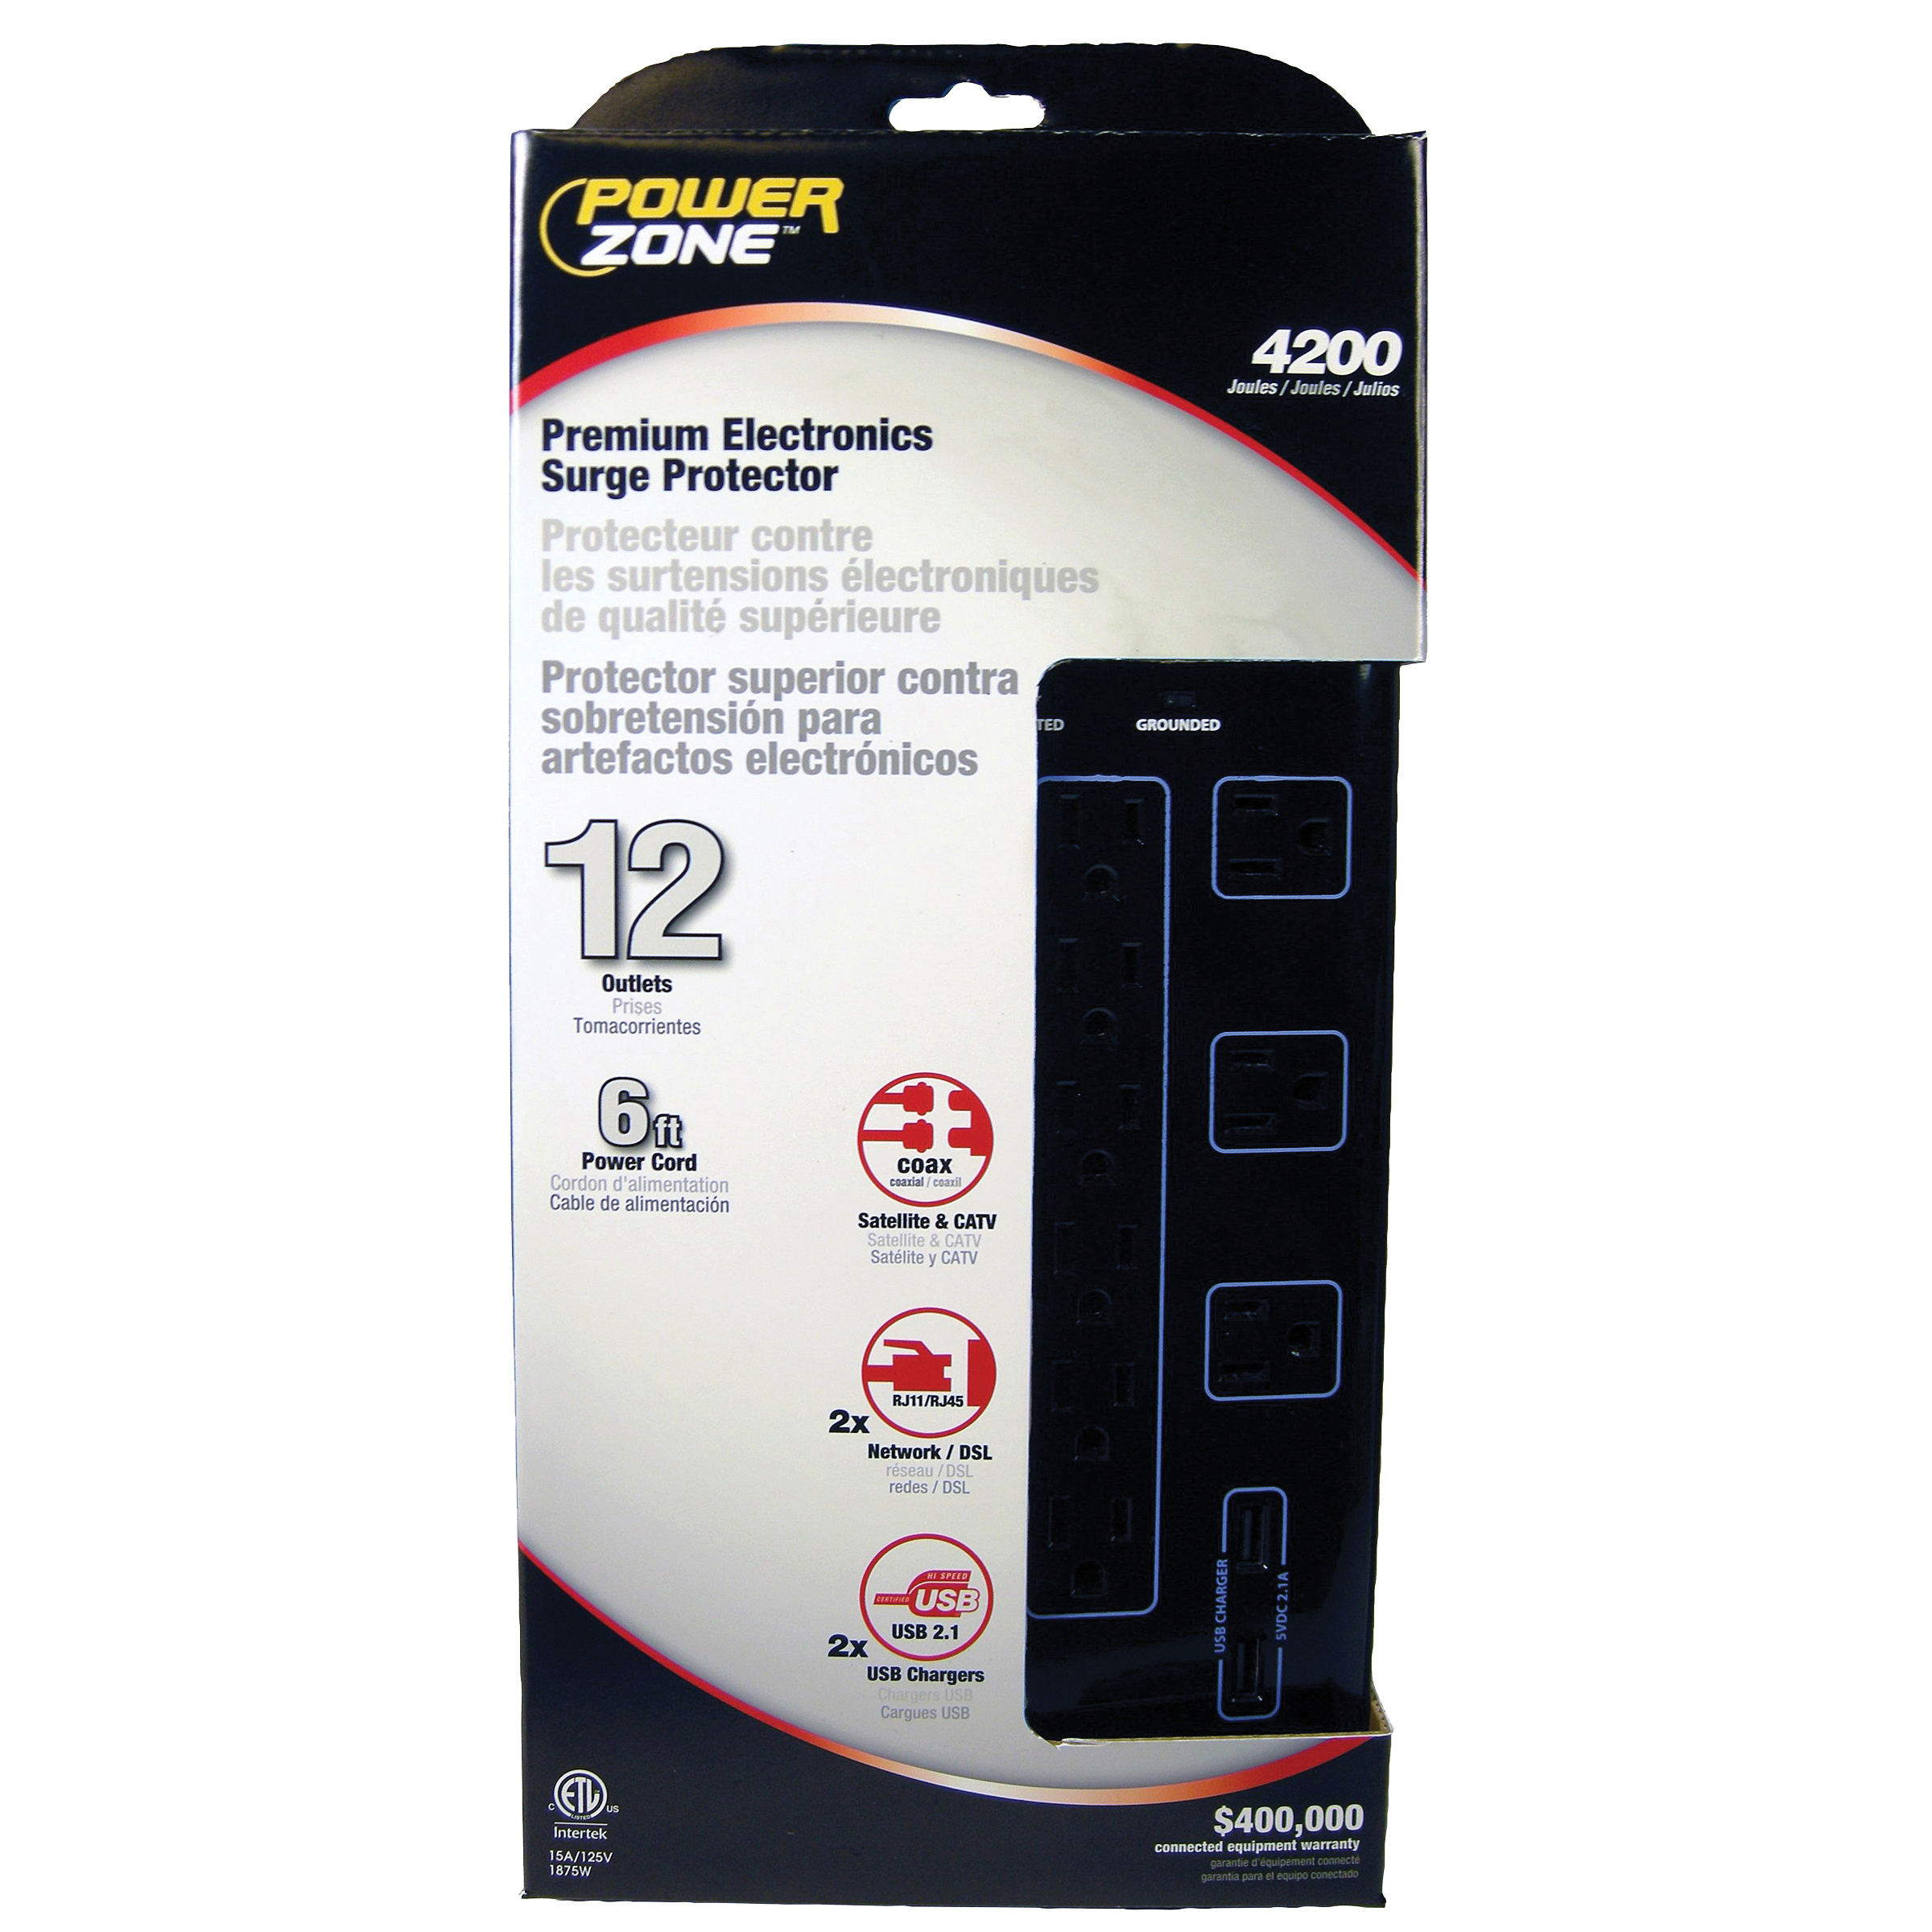 PowerZone OR504142 Surge Protector, 125 V, 15 A, 12-Outlet, 4200 Joules Energy, Black - 2